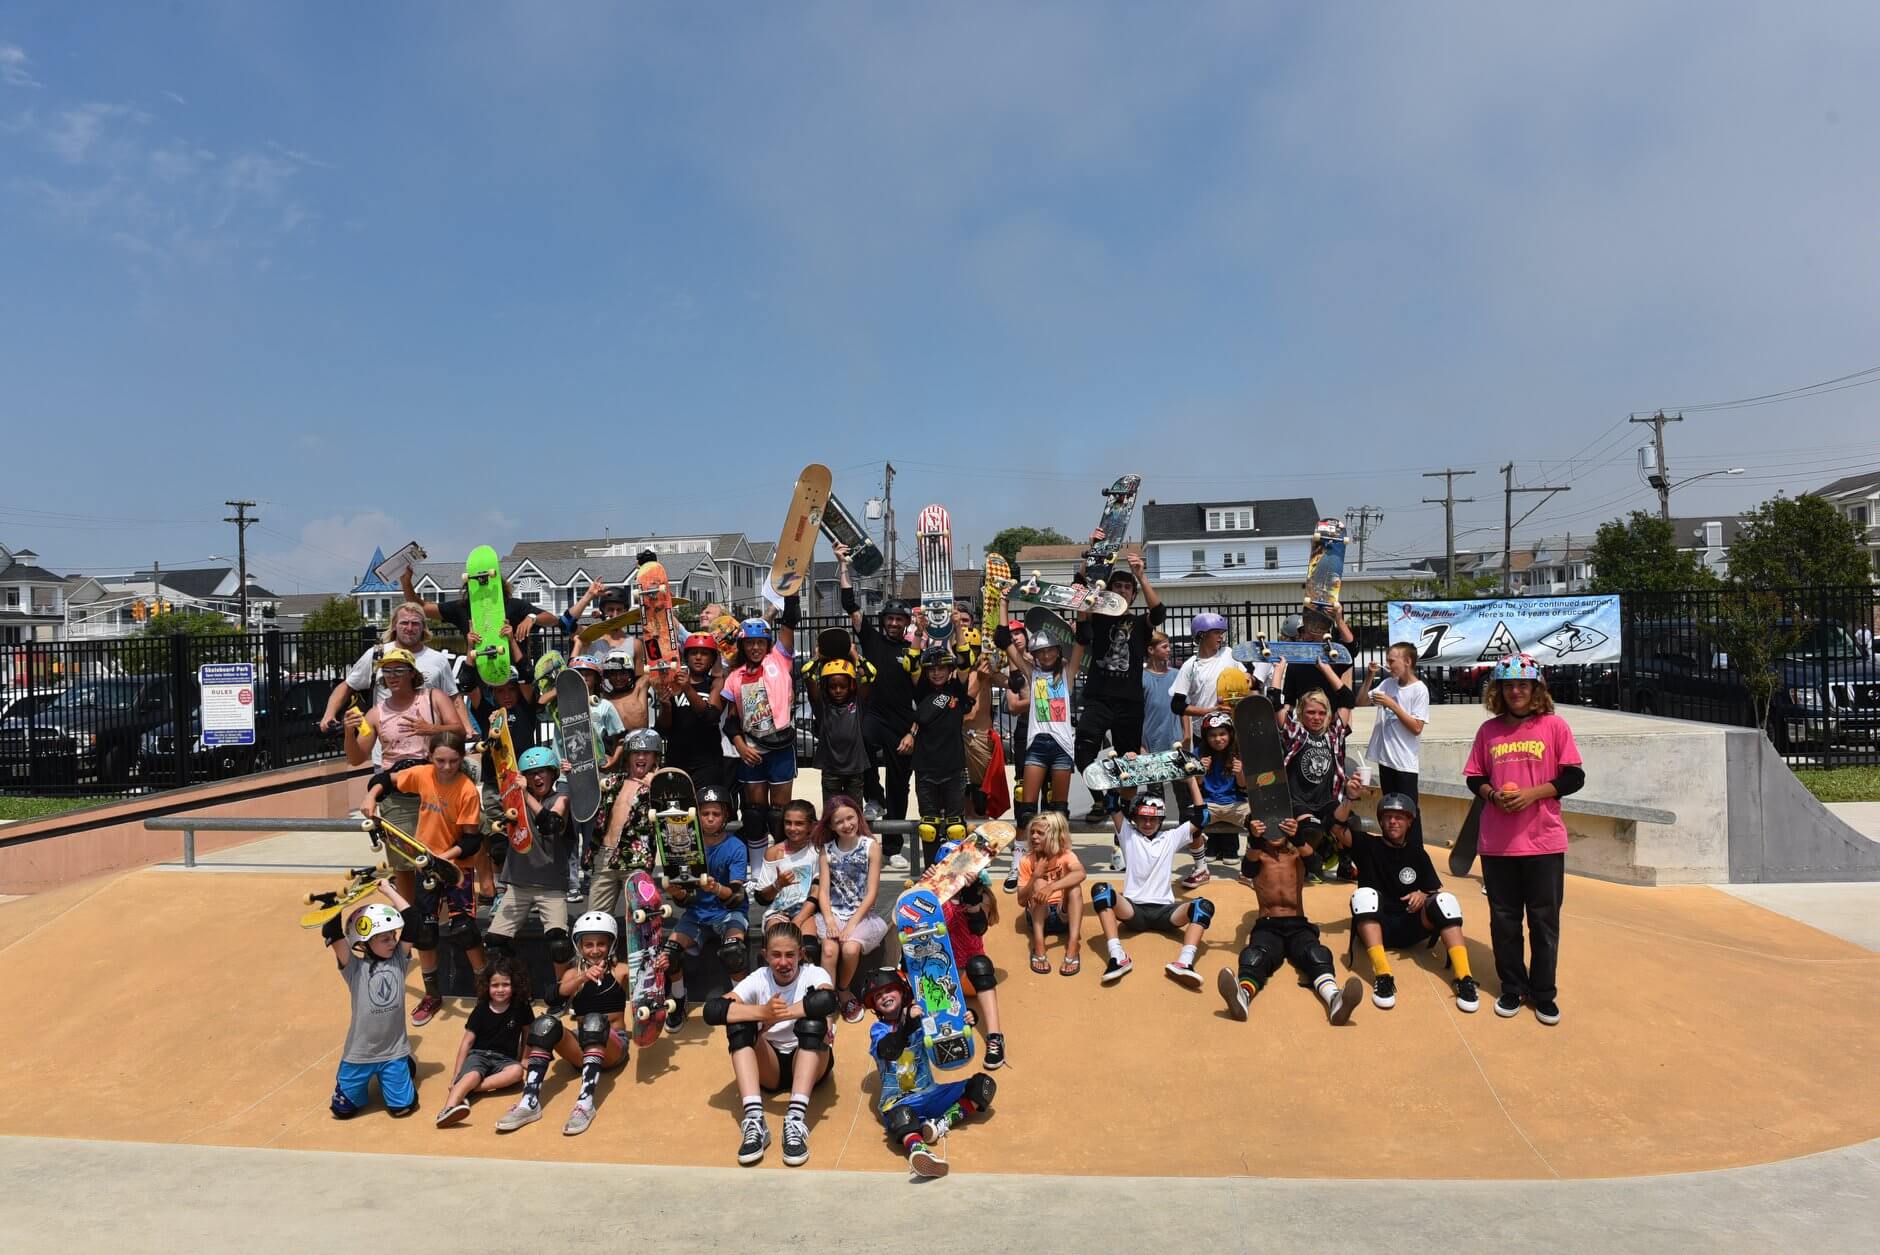 Skate Board Community Turns Out to Raise Money and Awareness for Amyloidosis13